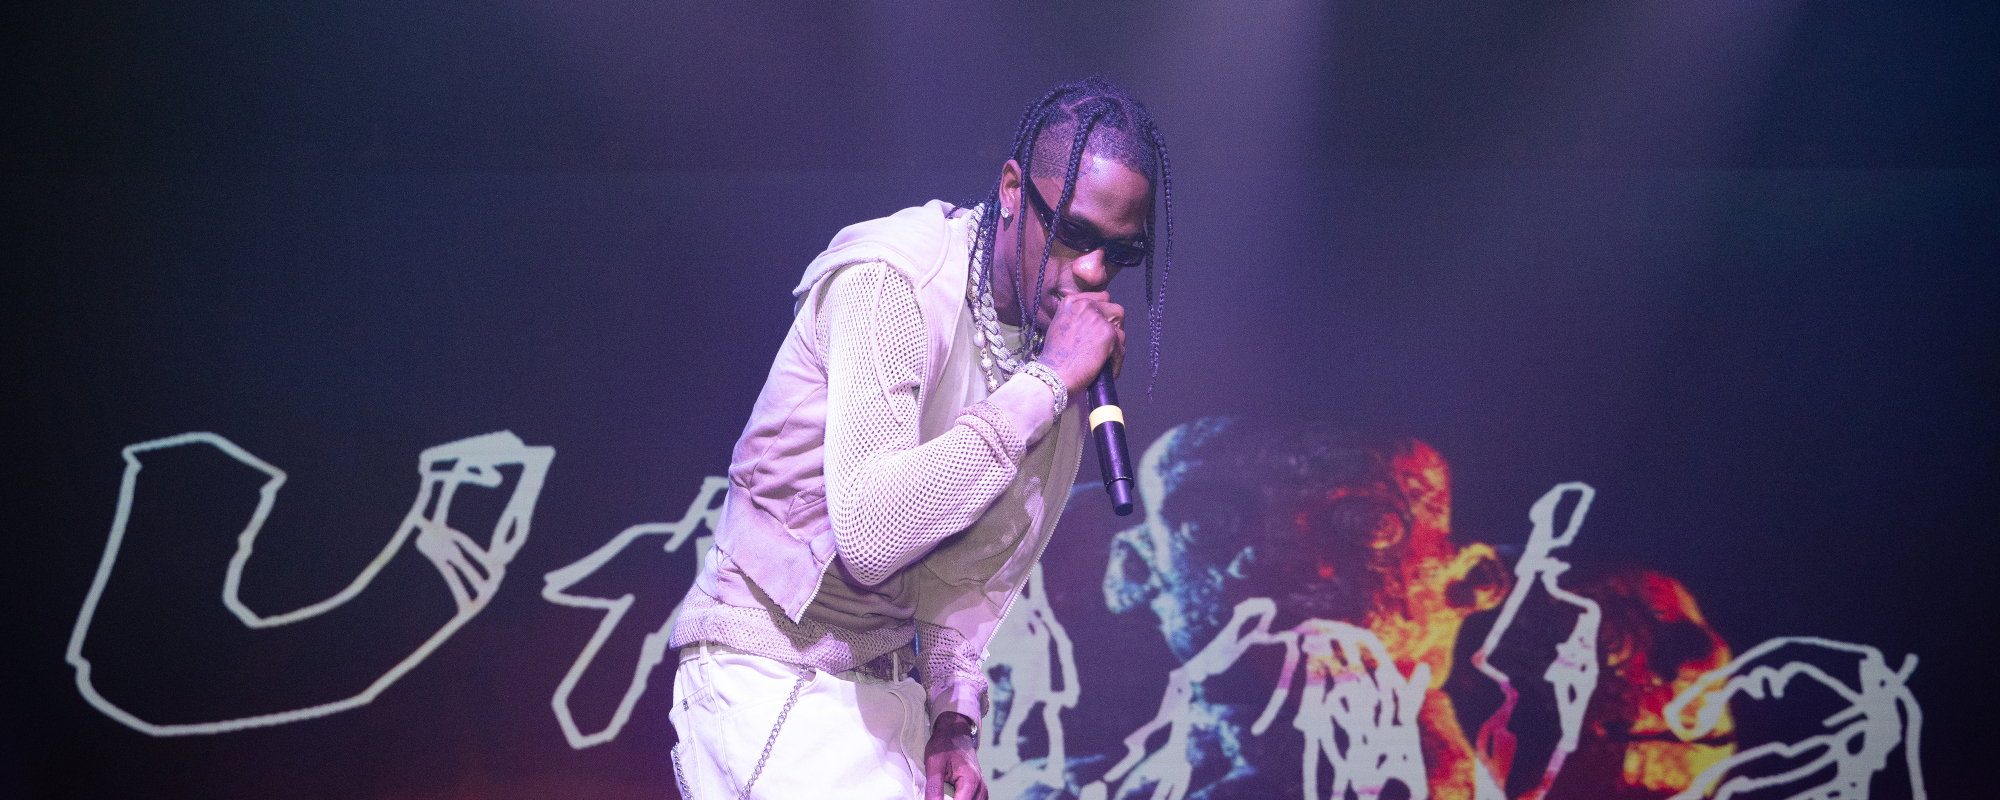 Travis Scott to Perform in Houston for First Time Since Astroworld Fest, City Officials Respond